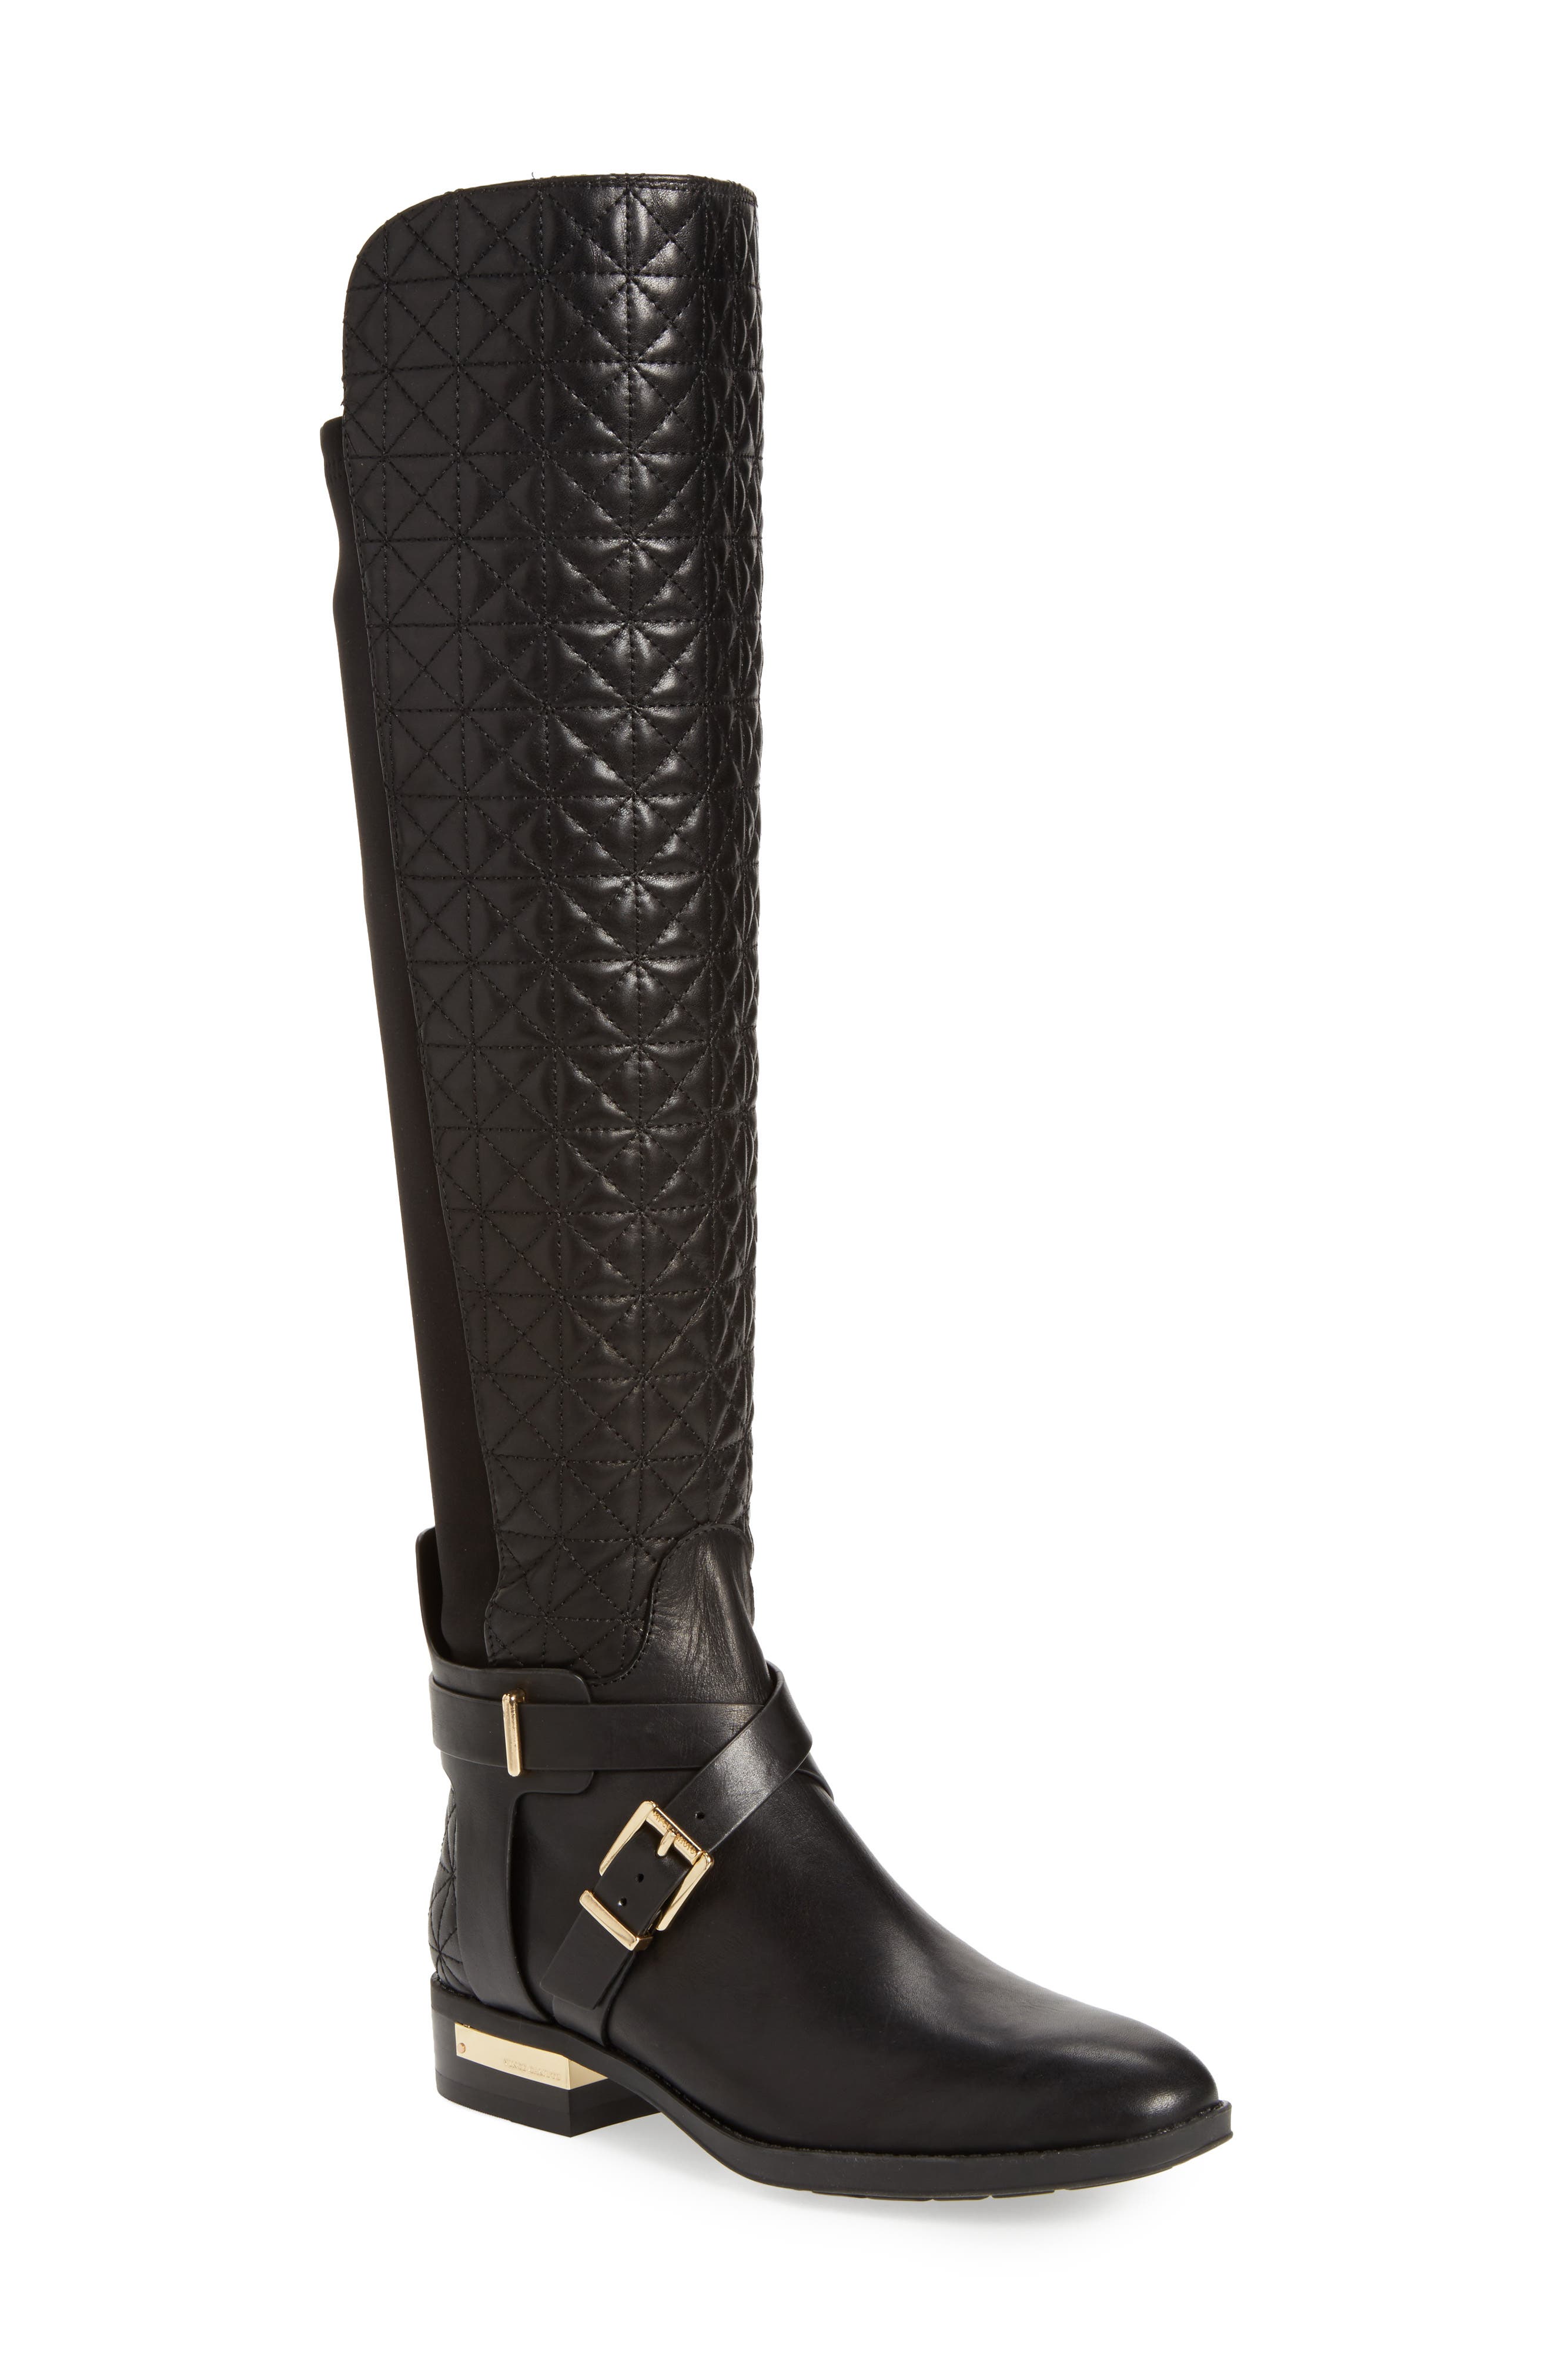 VINCE CAMUTO PATIRA WIDE-CALF QUILTED OVER-THE-KNEE RIDING BOOTS WOMEN ...